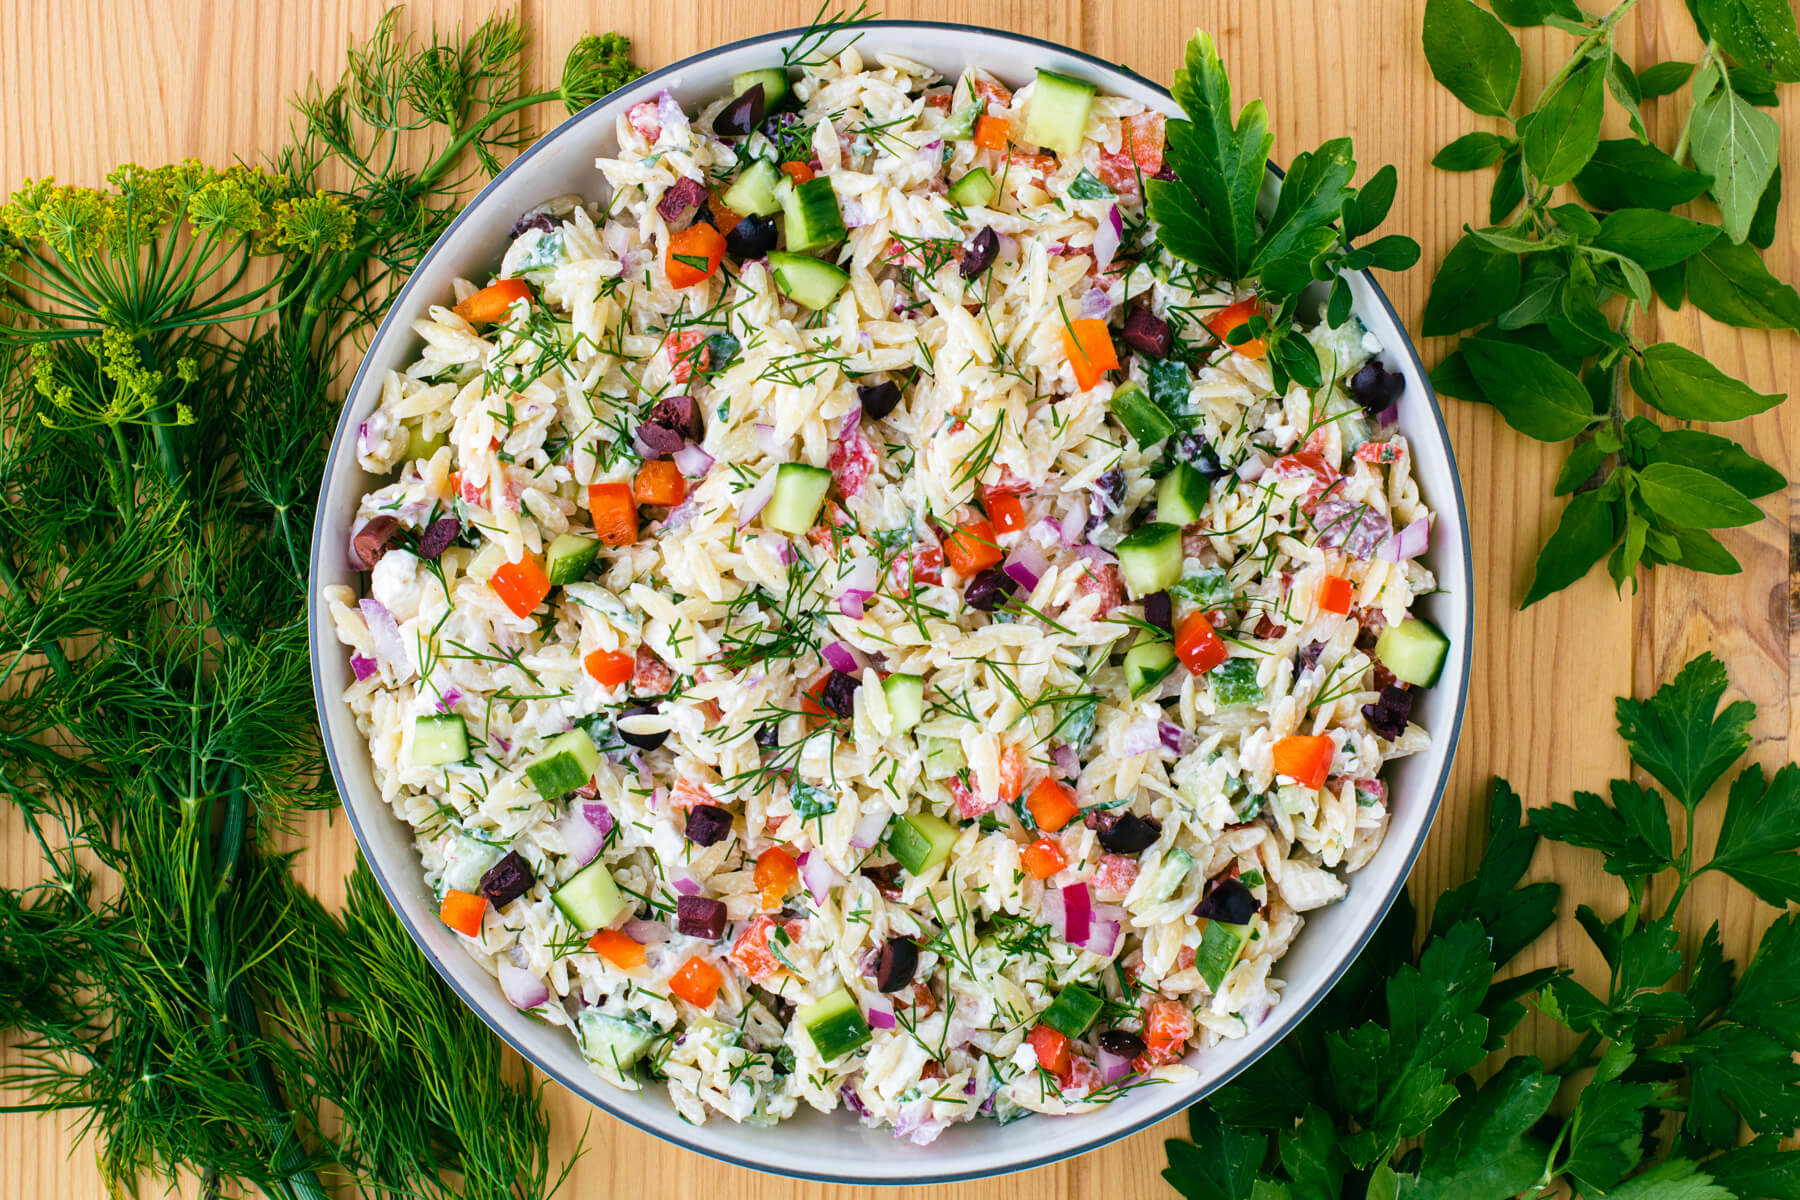 A white bowl holding a colourful Greek Orzo salad with feta cheese, green herbs, cucumbers, tomatoes, black olives, and peppers on a wooden background.